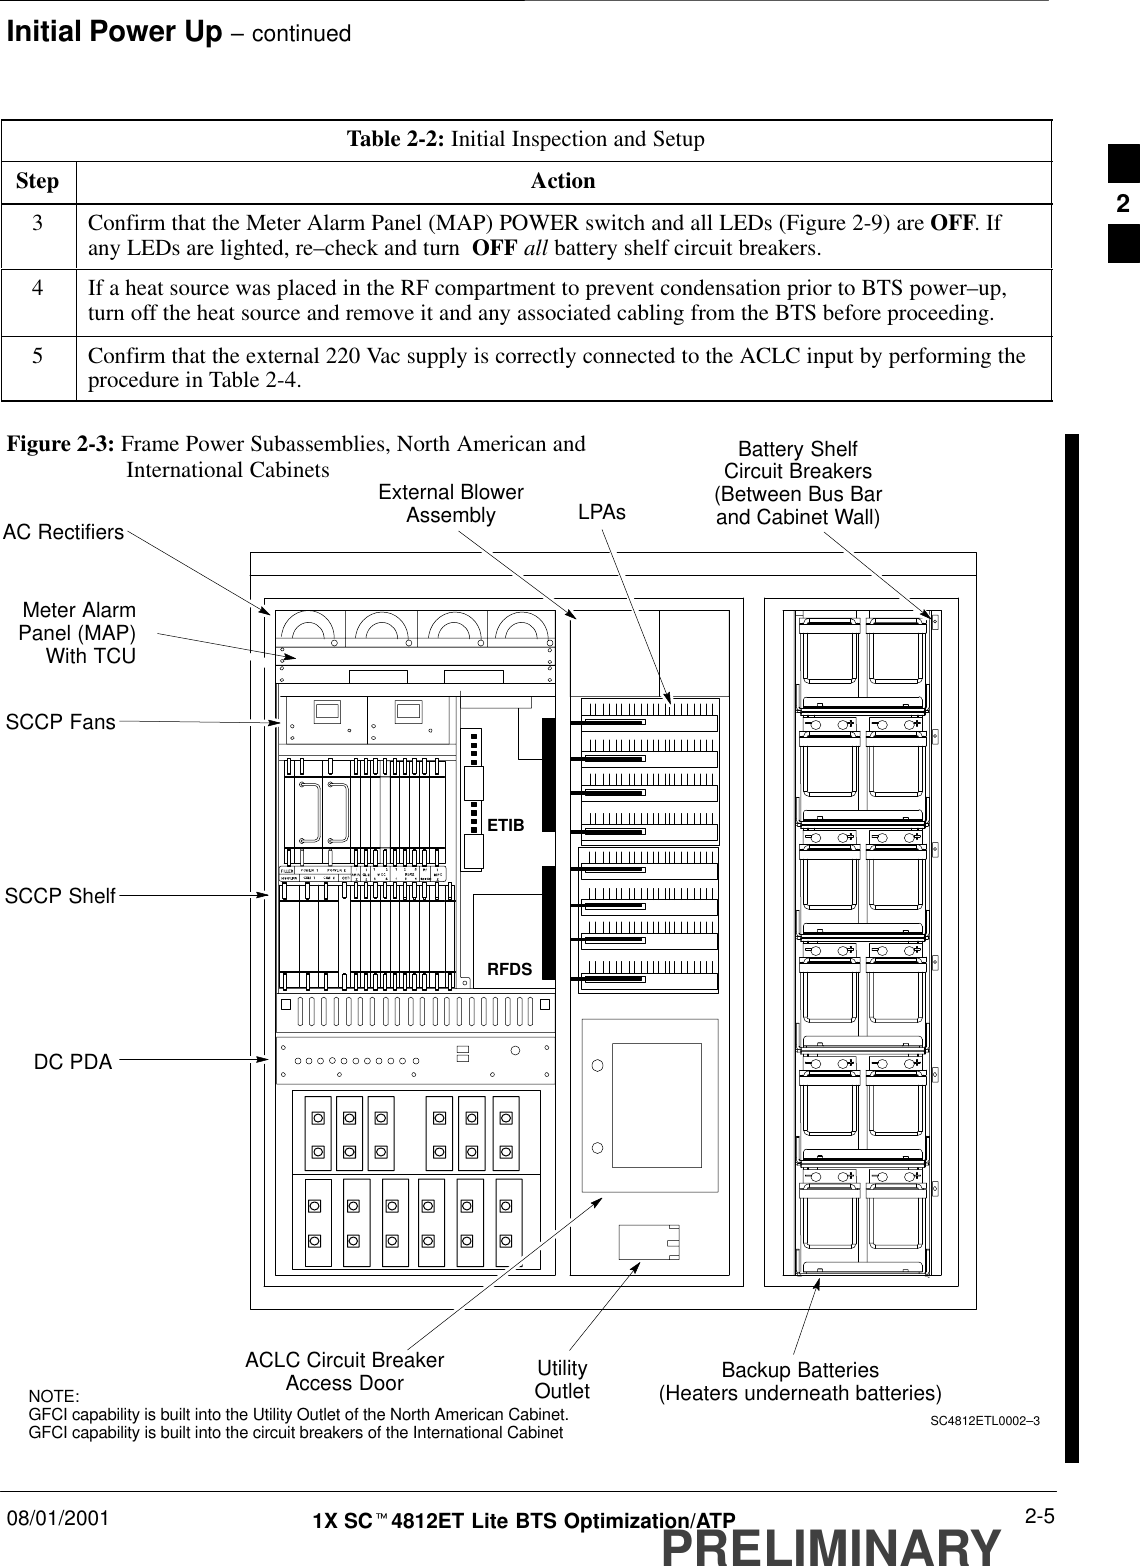 Initial Power Up – continued08/01/2001 2-51X SCt4812ET Lite BTS Optimization/ATPPRELIMINARYTable 2-2: Initial Inspection and SetupStep Action3Confirm that the Meter Alarm Panel (MAP) POWER switch and all LEDs (Figure 2-9) are OFF. Ifany LEDs are lighted, re–check and turn  OFF all battery shelf circuit breakers.4If a heat source was placed in the RF compartment to prevent condensation prior to BTS power–up,turn off the heat source and remove it and any associated cabling from the BTS before proceeding.5Confirm that the external 220 Vac supply is correctly connected to the ACLC input by performing theprocedure in Table 2-4. Figure 2-3: Frame Power Subassemblies, North American andInternational CabinetsLPAsSCCP FansRFDSSCCP ShelfETIBMeter AlarmPanel (MAP)With TCUAC RectifiersDC PDABackup Batteries(Heaters underneath batteries)External BlowerAssemblySC4812ETL0002–3Battery ShelfCircuit Breakers(Between Bus Barand Cabinet Wall)UtilityOutletACLC Circuit BreakerAccess DoorNOTE:GFCI capability is built into the Utility Outlet of the North American Cabinet.GFCI capability is built into the circuit breakers of the International Cabinet2